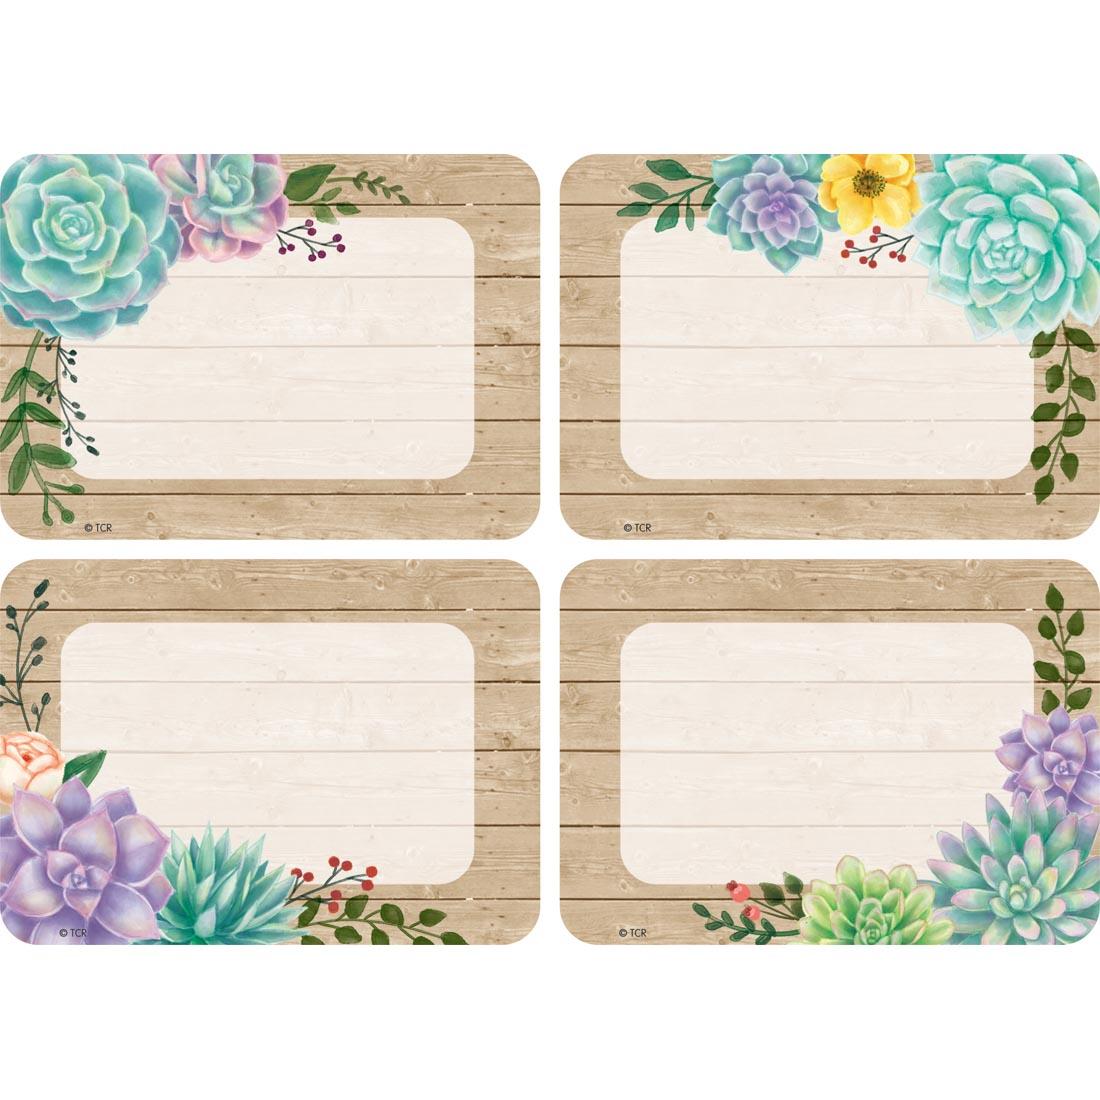 Name Tags / Labels from the Rustic Bloom collection by Teacher Created Resources